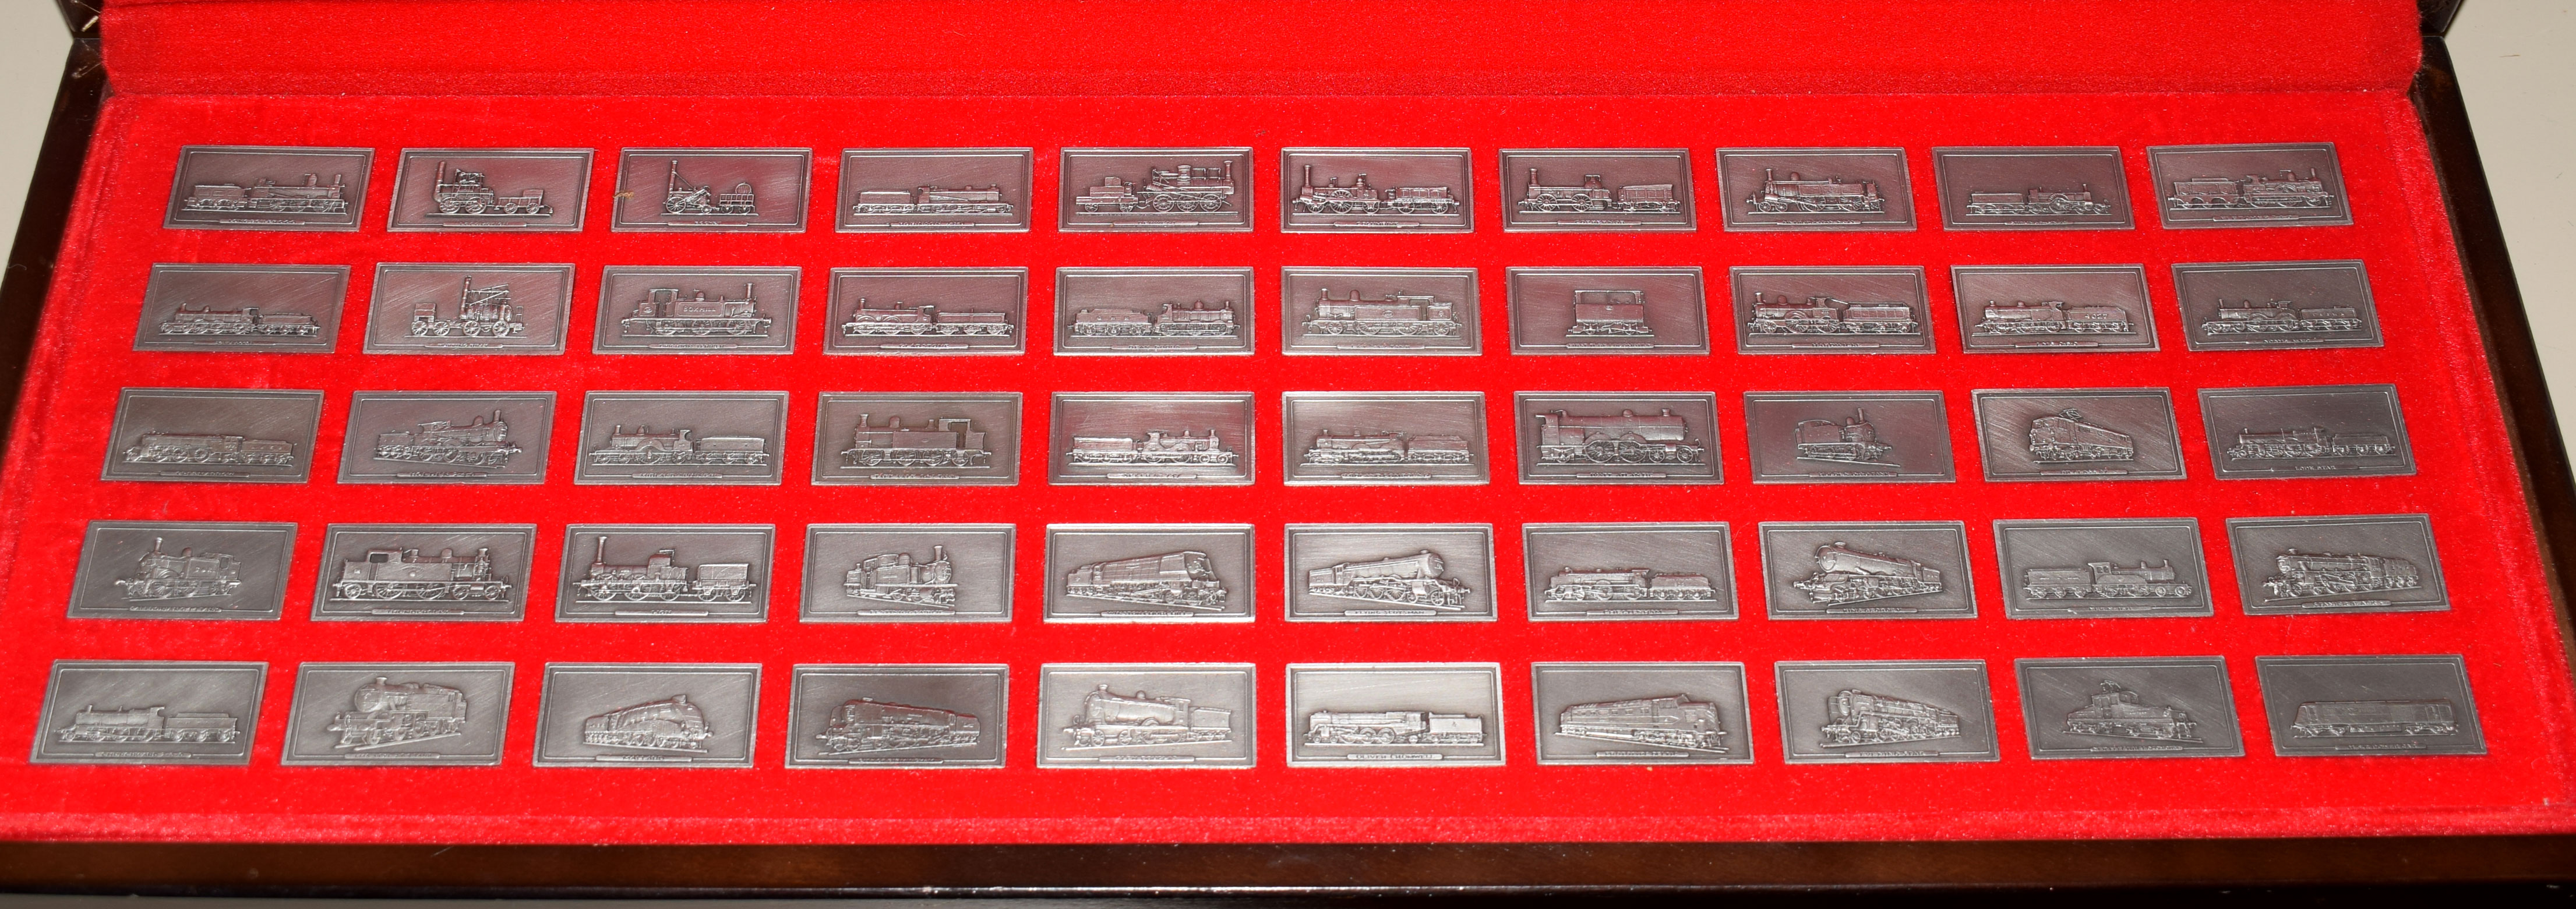 "Great British Locomotives" collection of fifty pewter ingots, featuring various locomotives from